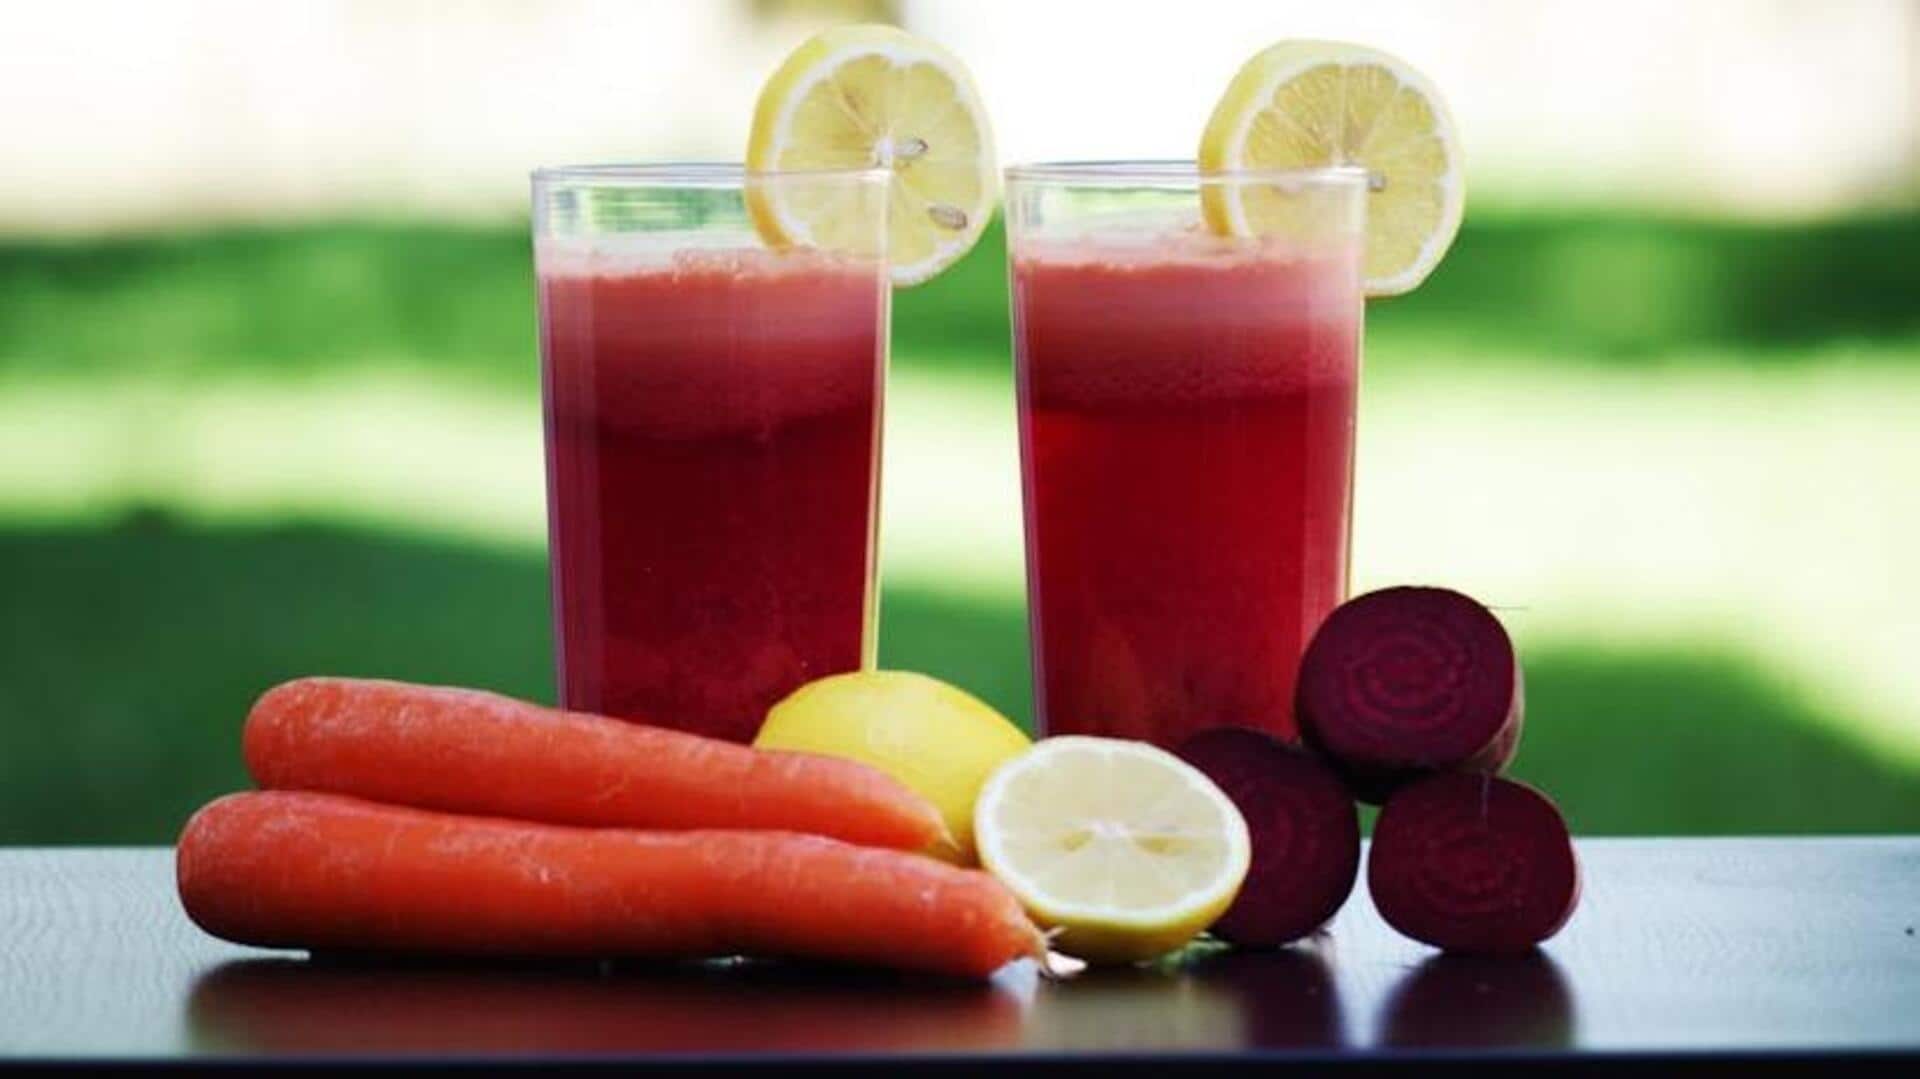 Sip on these veggies juices for glowing skin